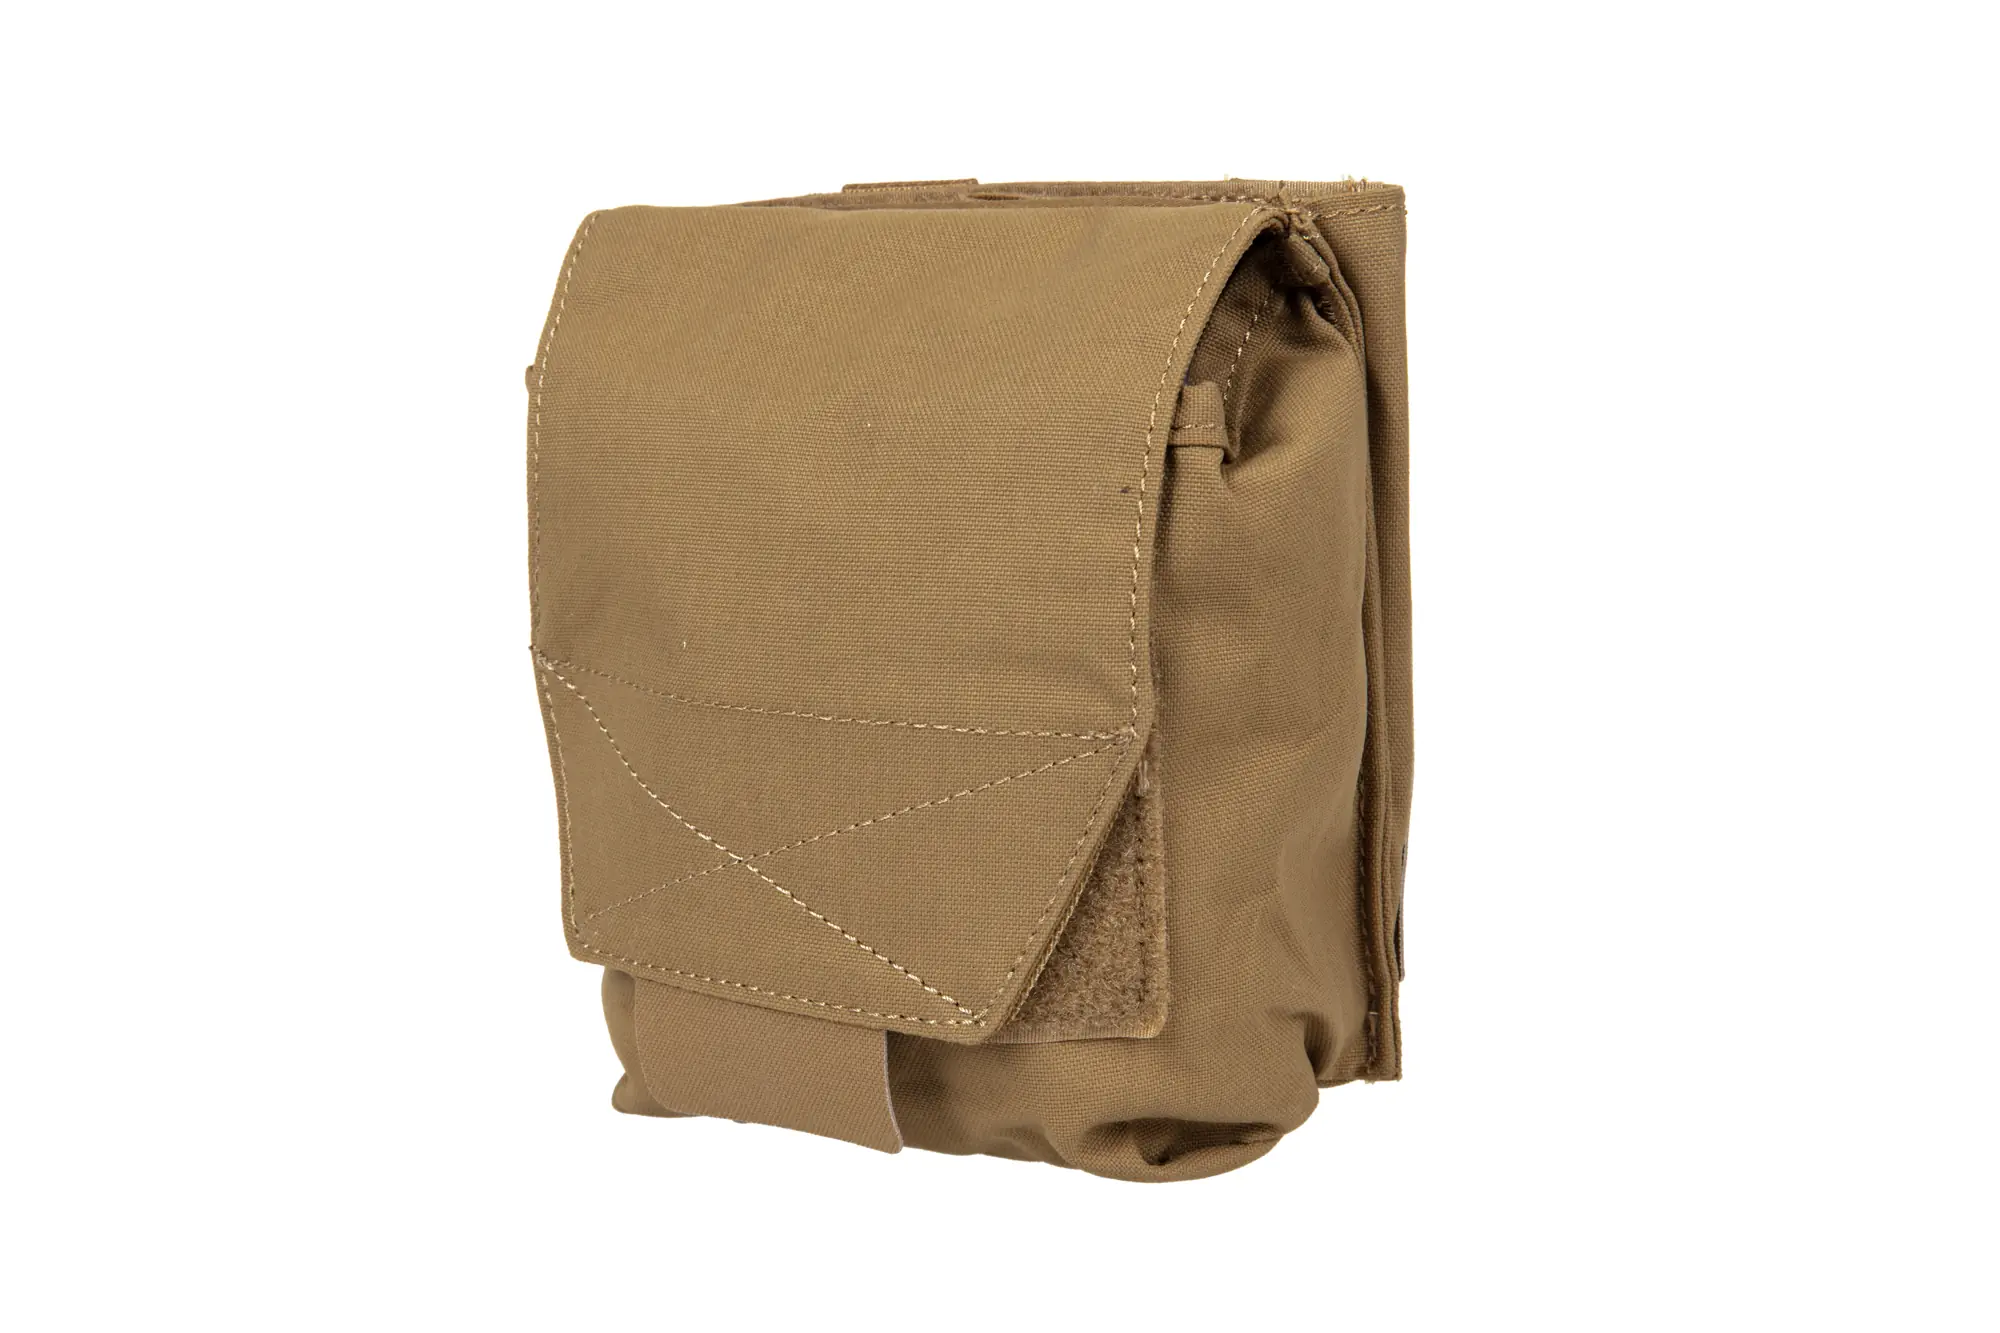 Universal Tactical Pouch Paras - Coyote Brown